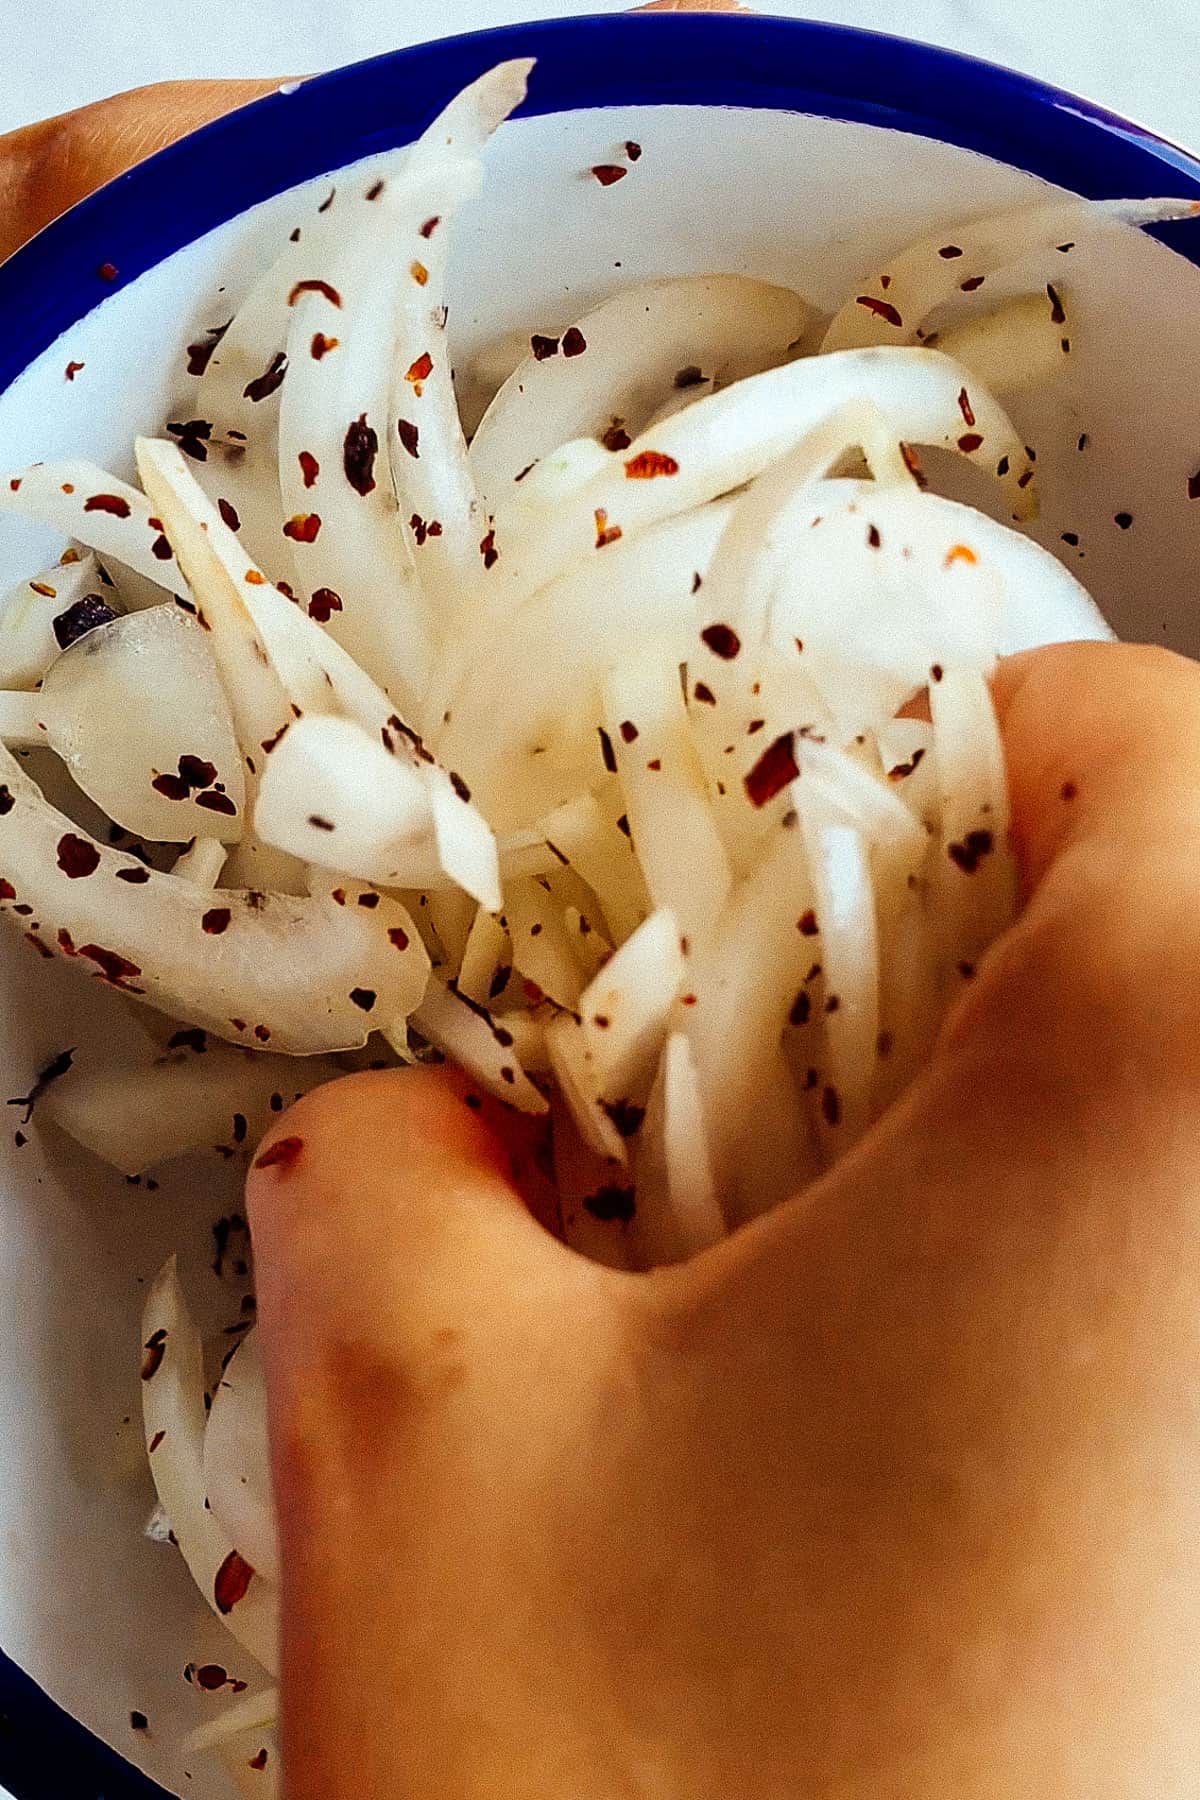 onion and sumac being mixed by female's hand